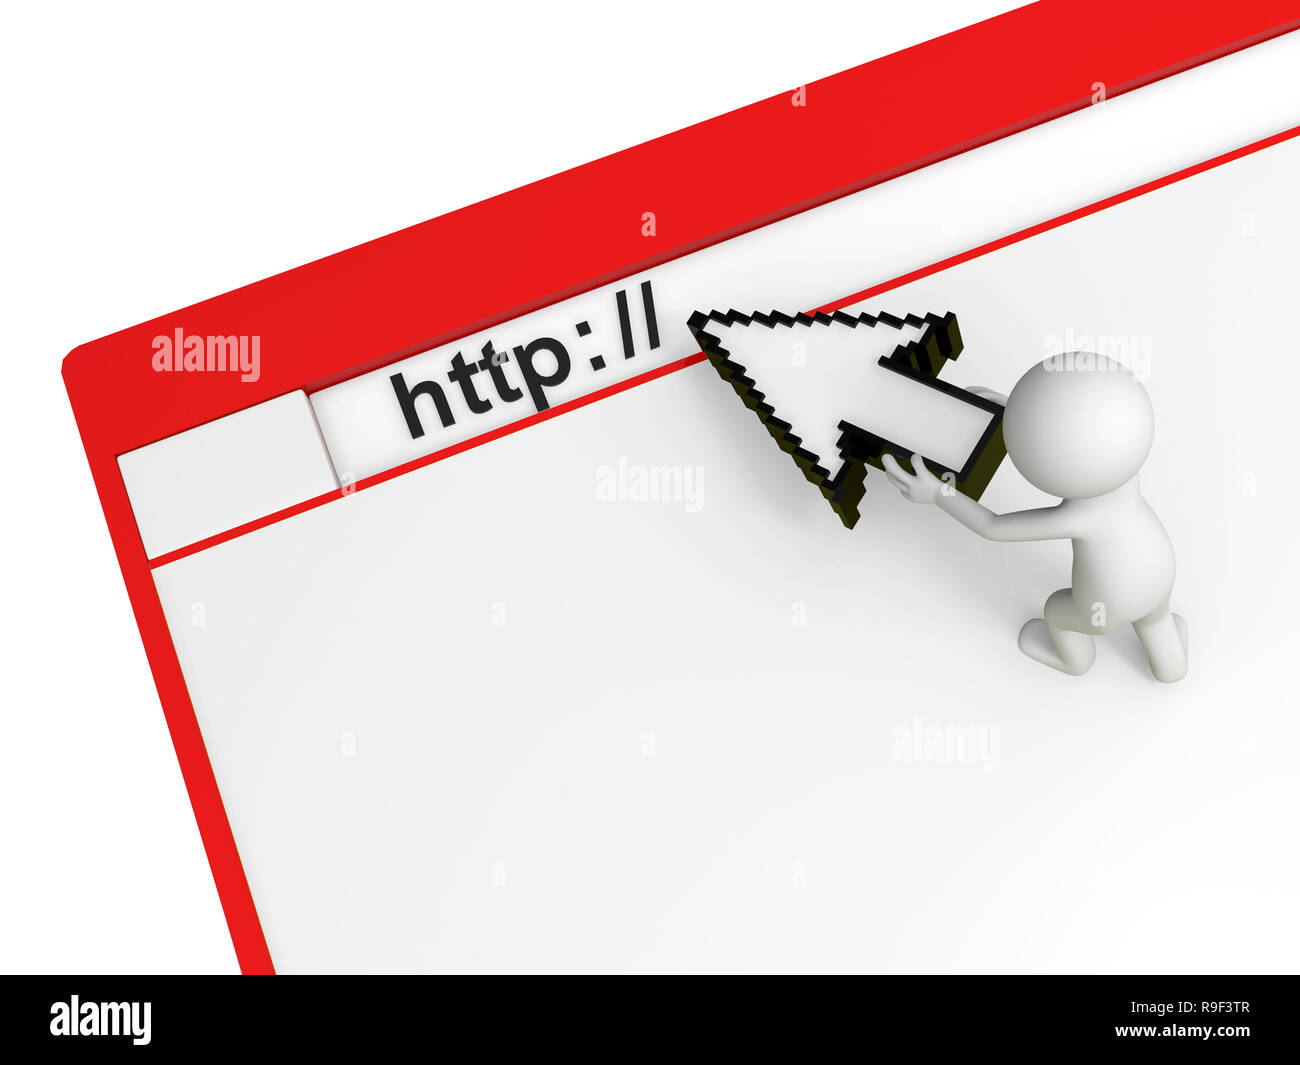 http,mouse,a man surfing the internet with a mouse Stock Photo